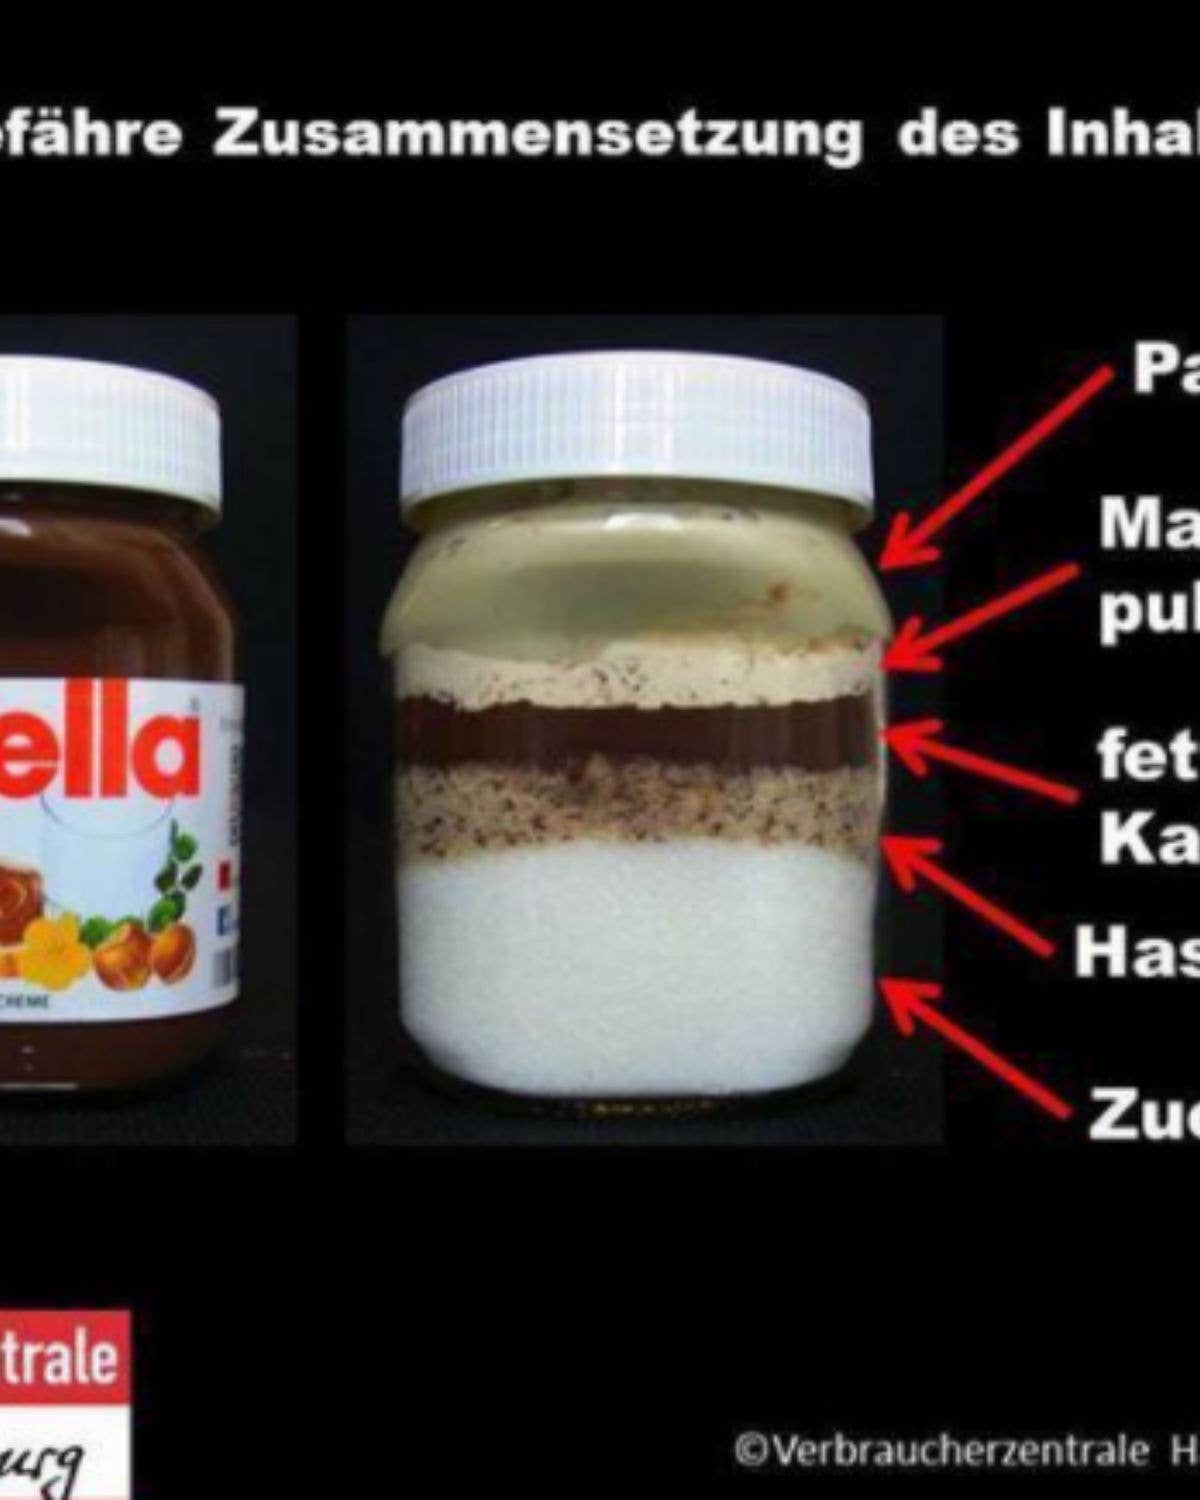 These German Graphics Show What Really Goes Into Your Favorite Food Products